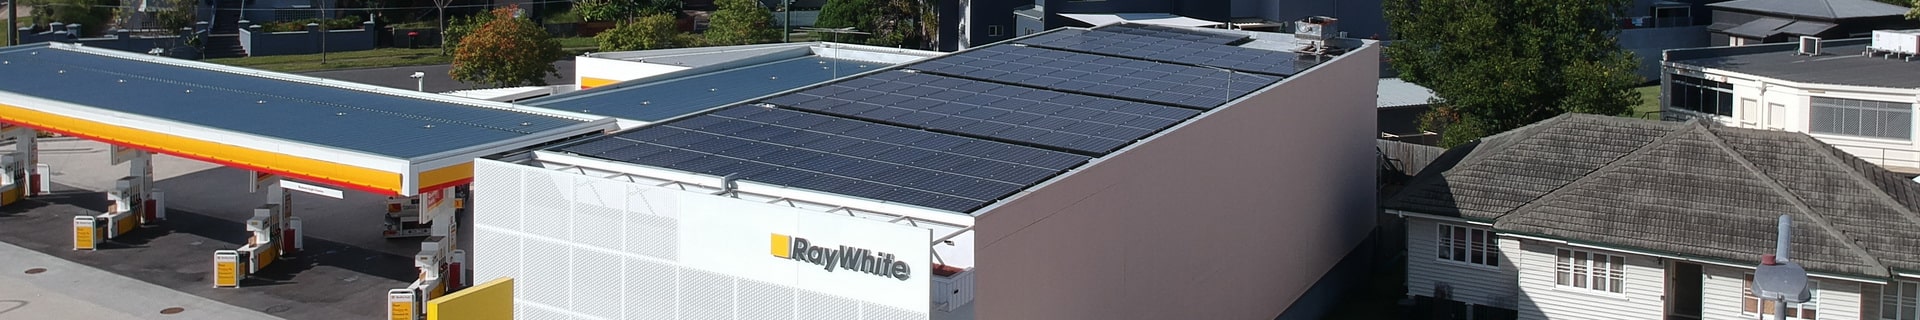 Solar panels on rooftop